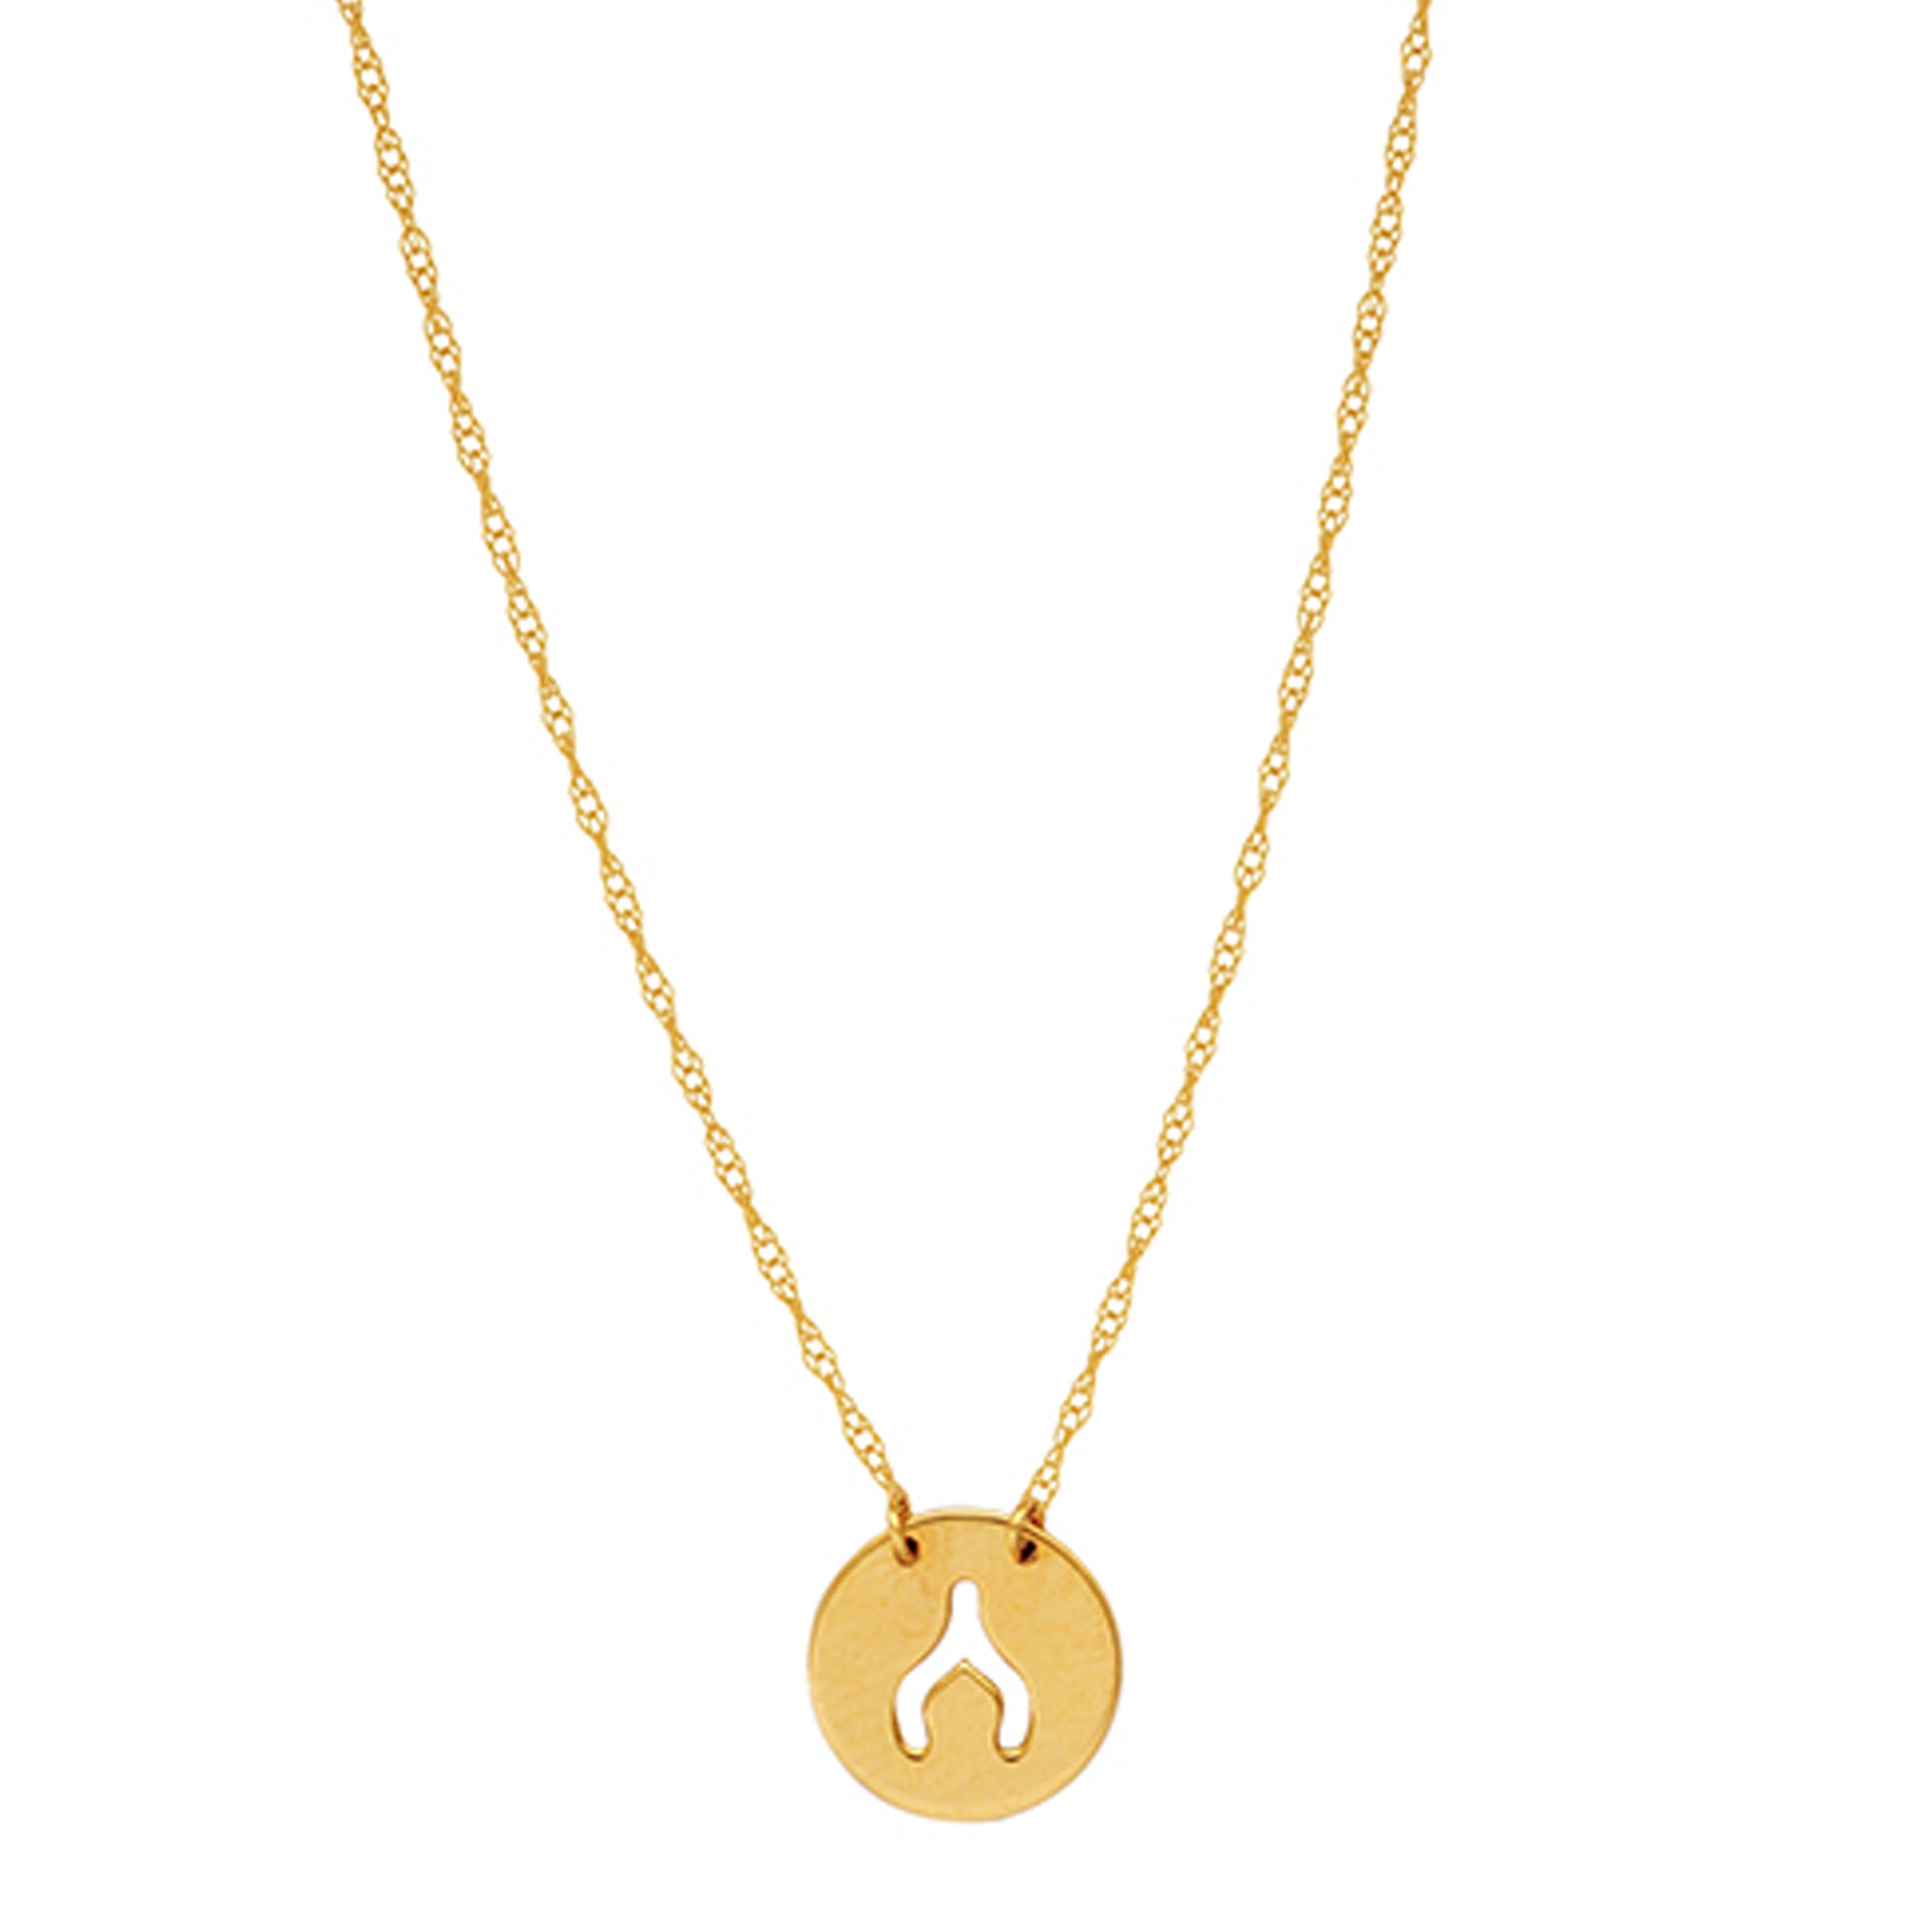 14K Yellow Gold Mini Wishbone Pendant Necklace, 16" To 18" Adjustable fine designer jewelry for men and women